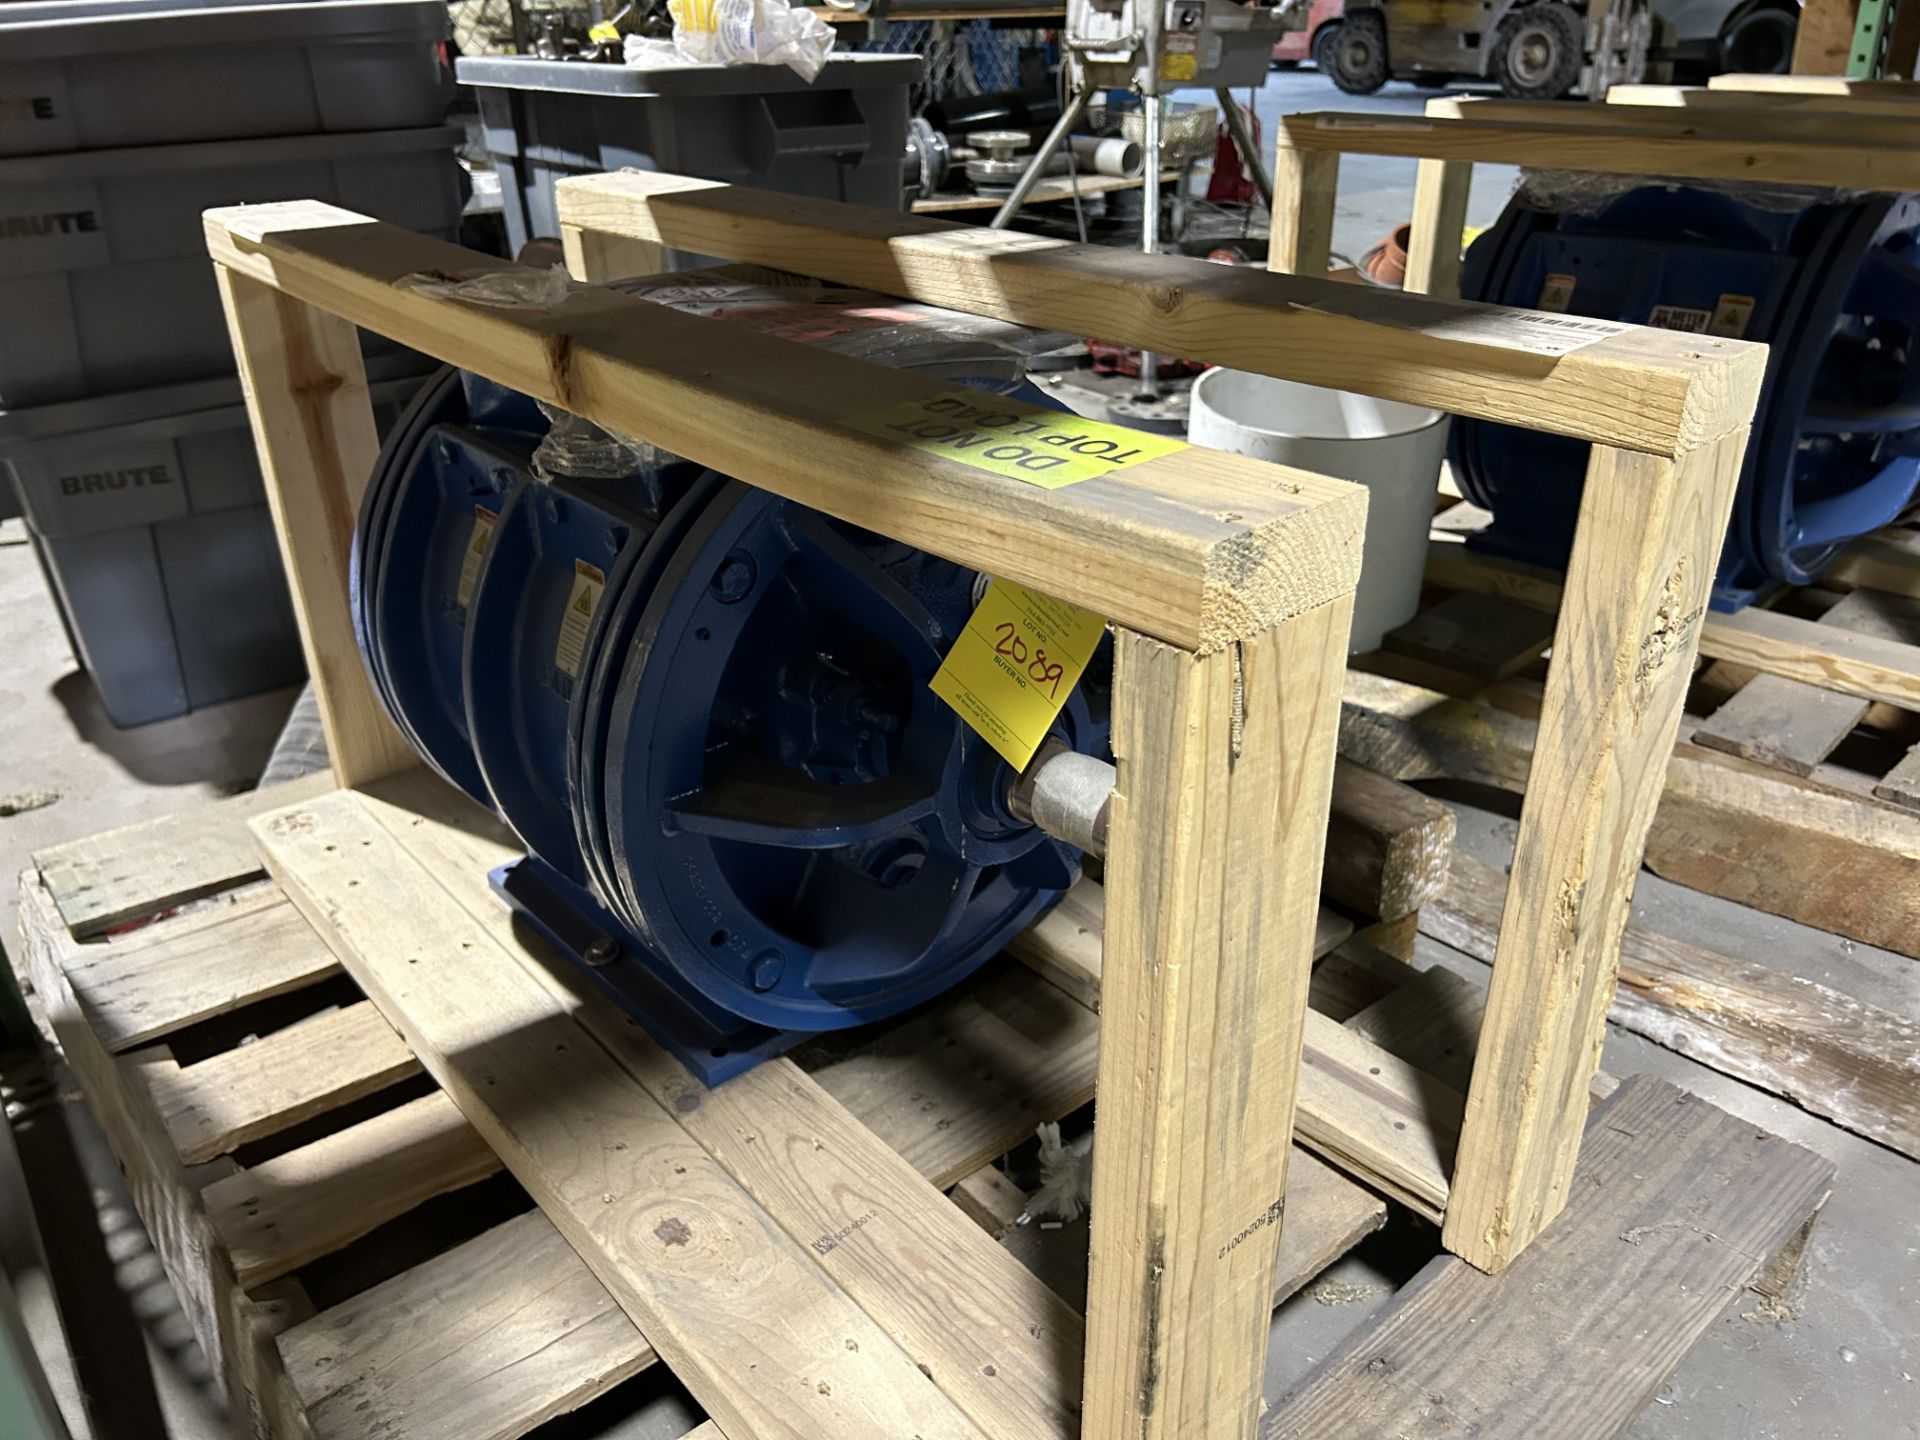 Andritz Rotary Valve , Rigging & Loading Fee: $125 - Image 7 of 9